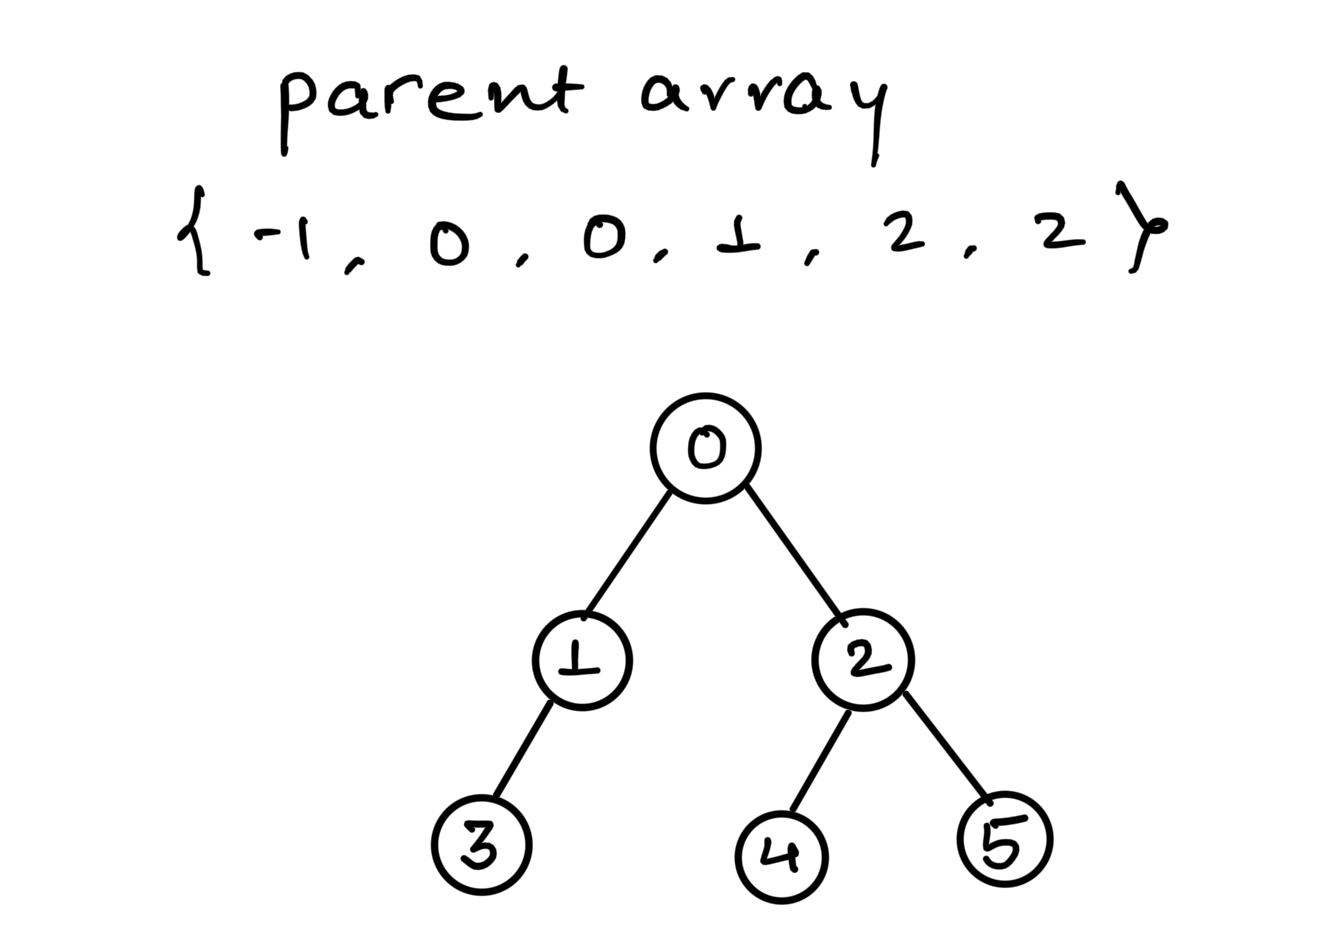 Construct Binary Tree from given Parent Array representation